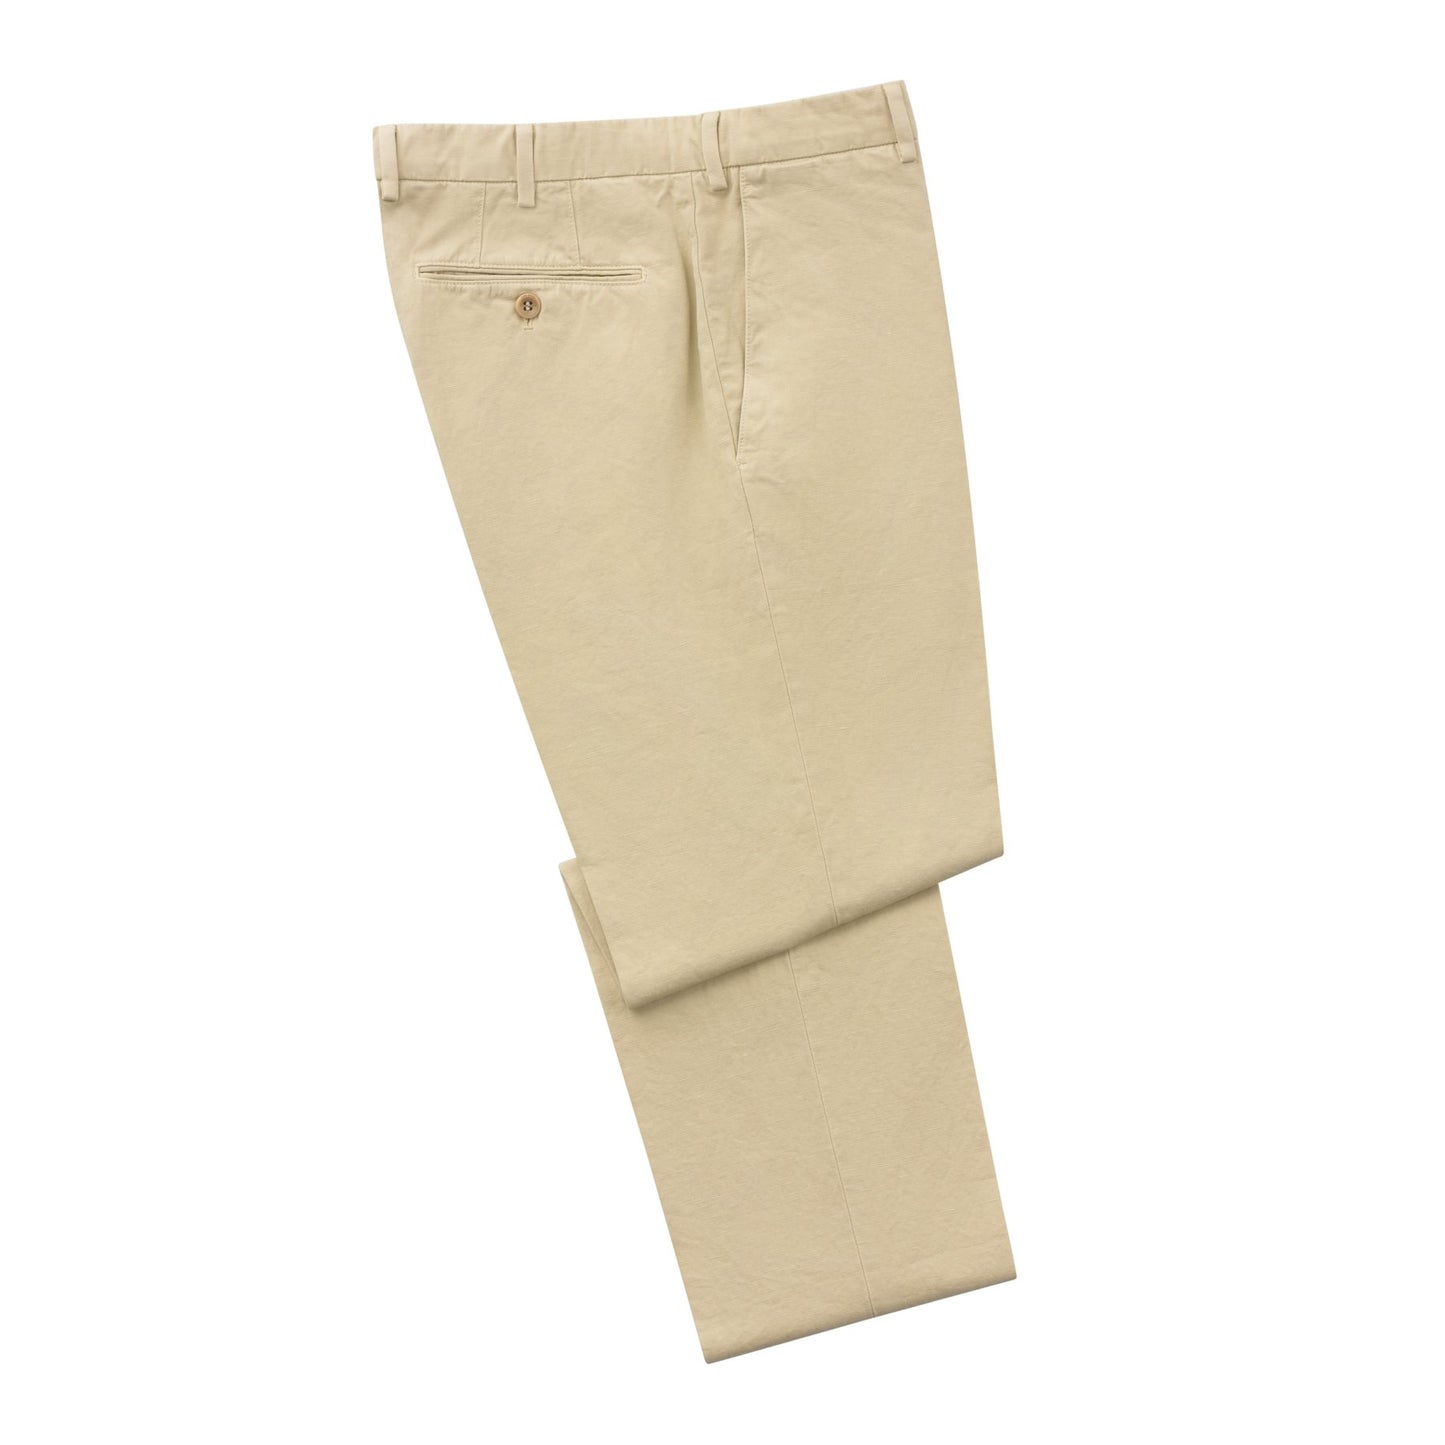 Loro Piana Slim-Fit Cotton and Linen-Blend Trousers in Sand Beige - SARTALE